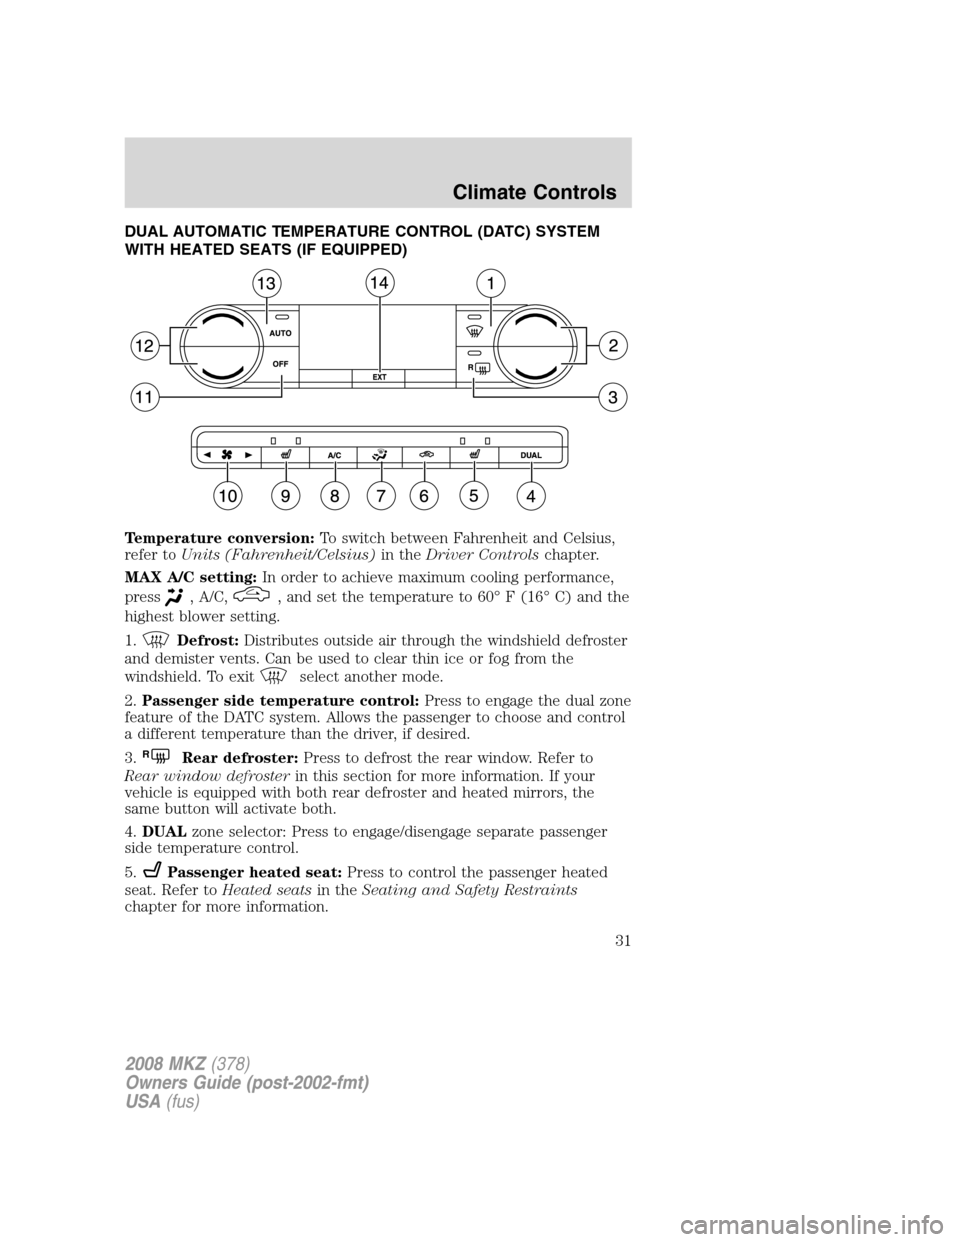 LINCOLN MKZ 2008  Owners Manual DUAL AUTOMATIC TEMPERATURE CONTROL (DATC) SYSTEM
WITH HEATED SEATS (IF EQUIPPED)
Temperature conversion:To switch between Fahrenheit and Celsius,
refer toUnits (Fahrenheit/Celsius)in theDriver Control